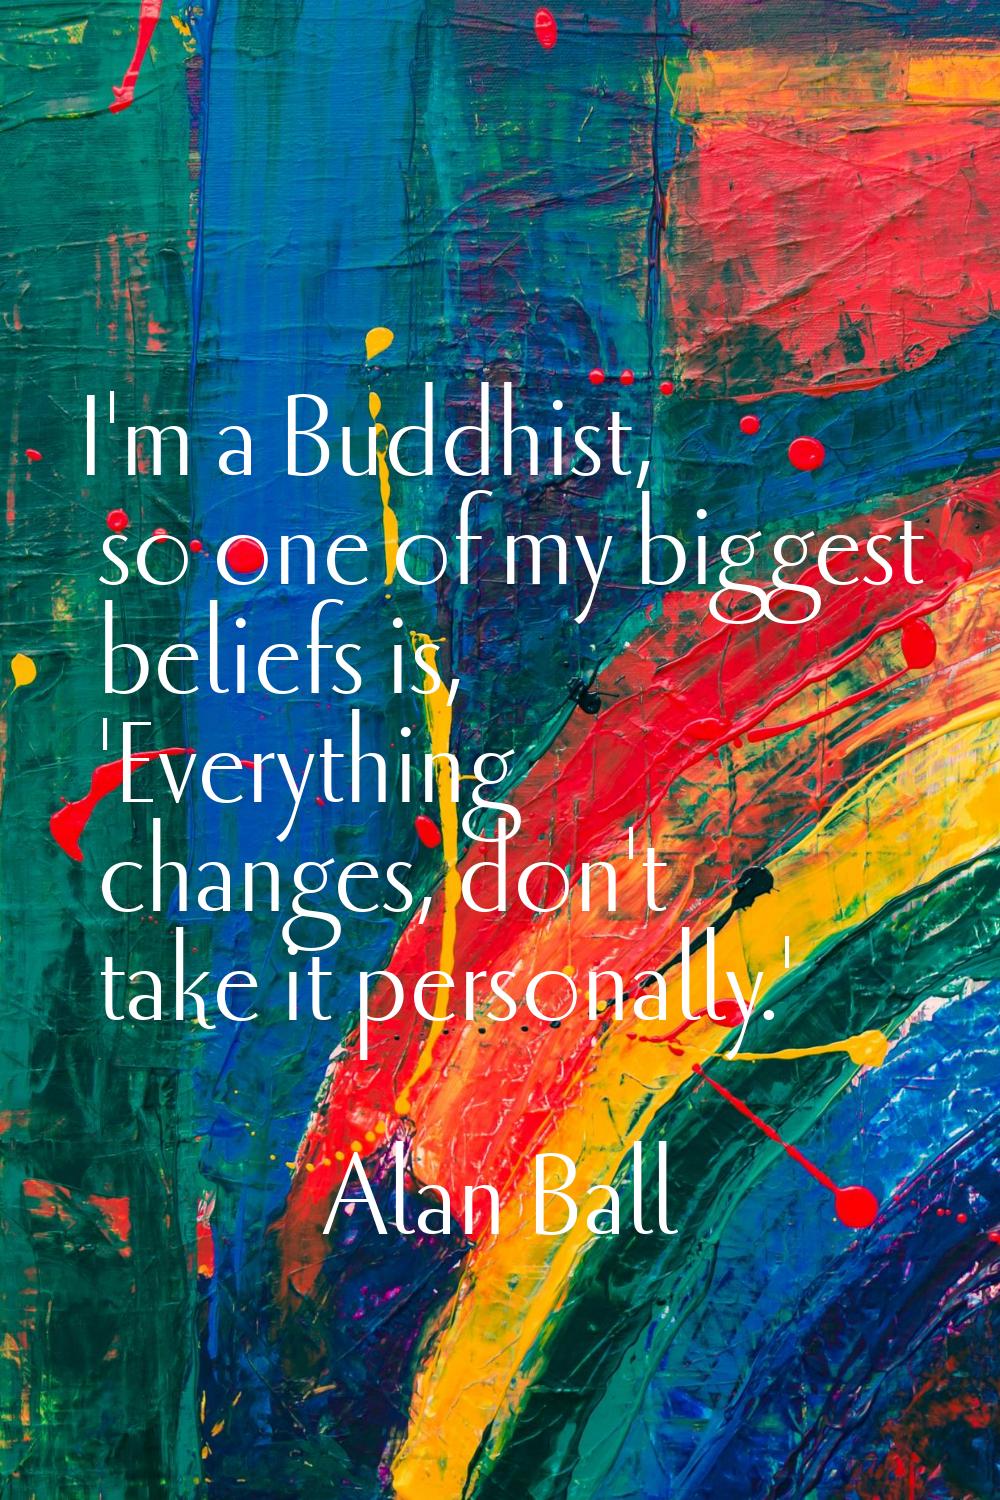 I'm a Buddhist, so one of my biggest beliefs is, 'Everything changes, don't take it personally.'